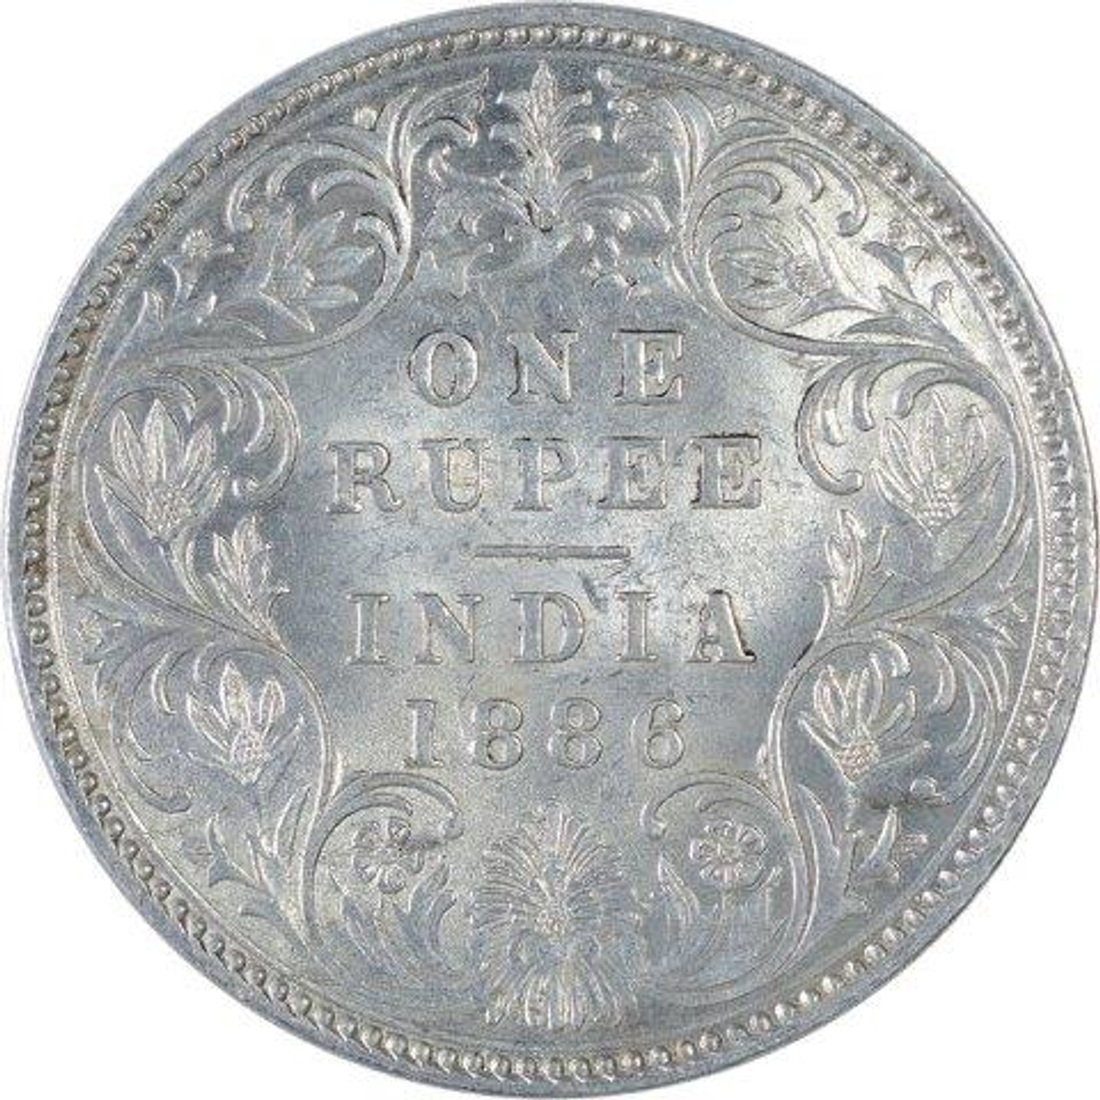 Silver One Rupee Coin of Victoria Empress of 1886.